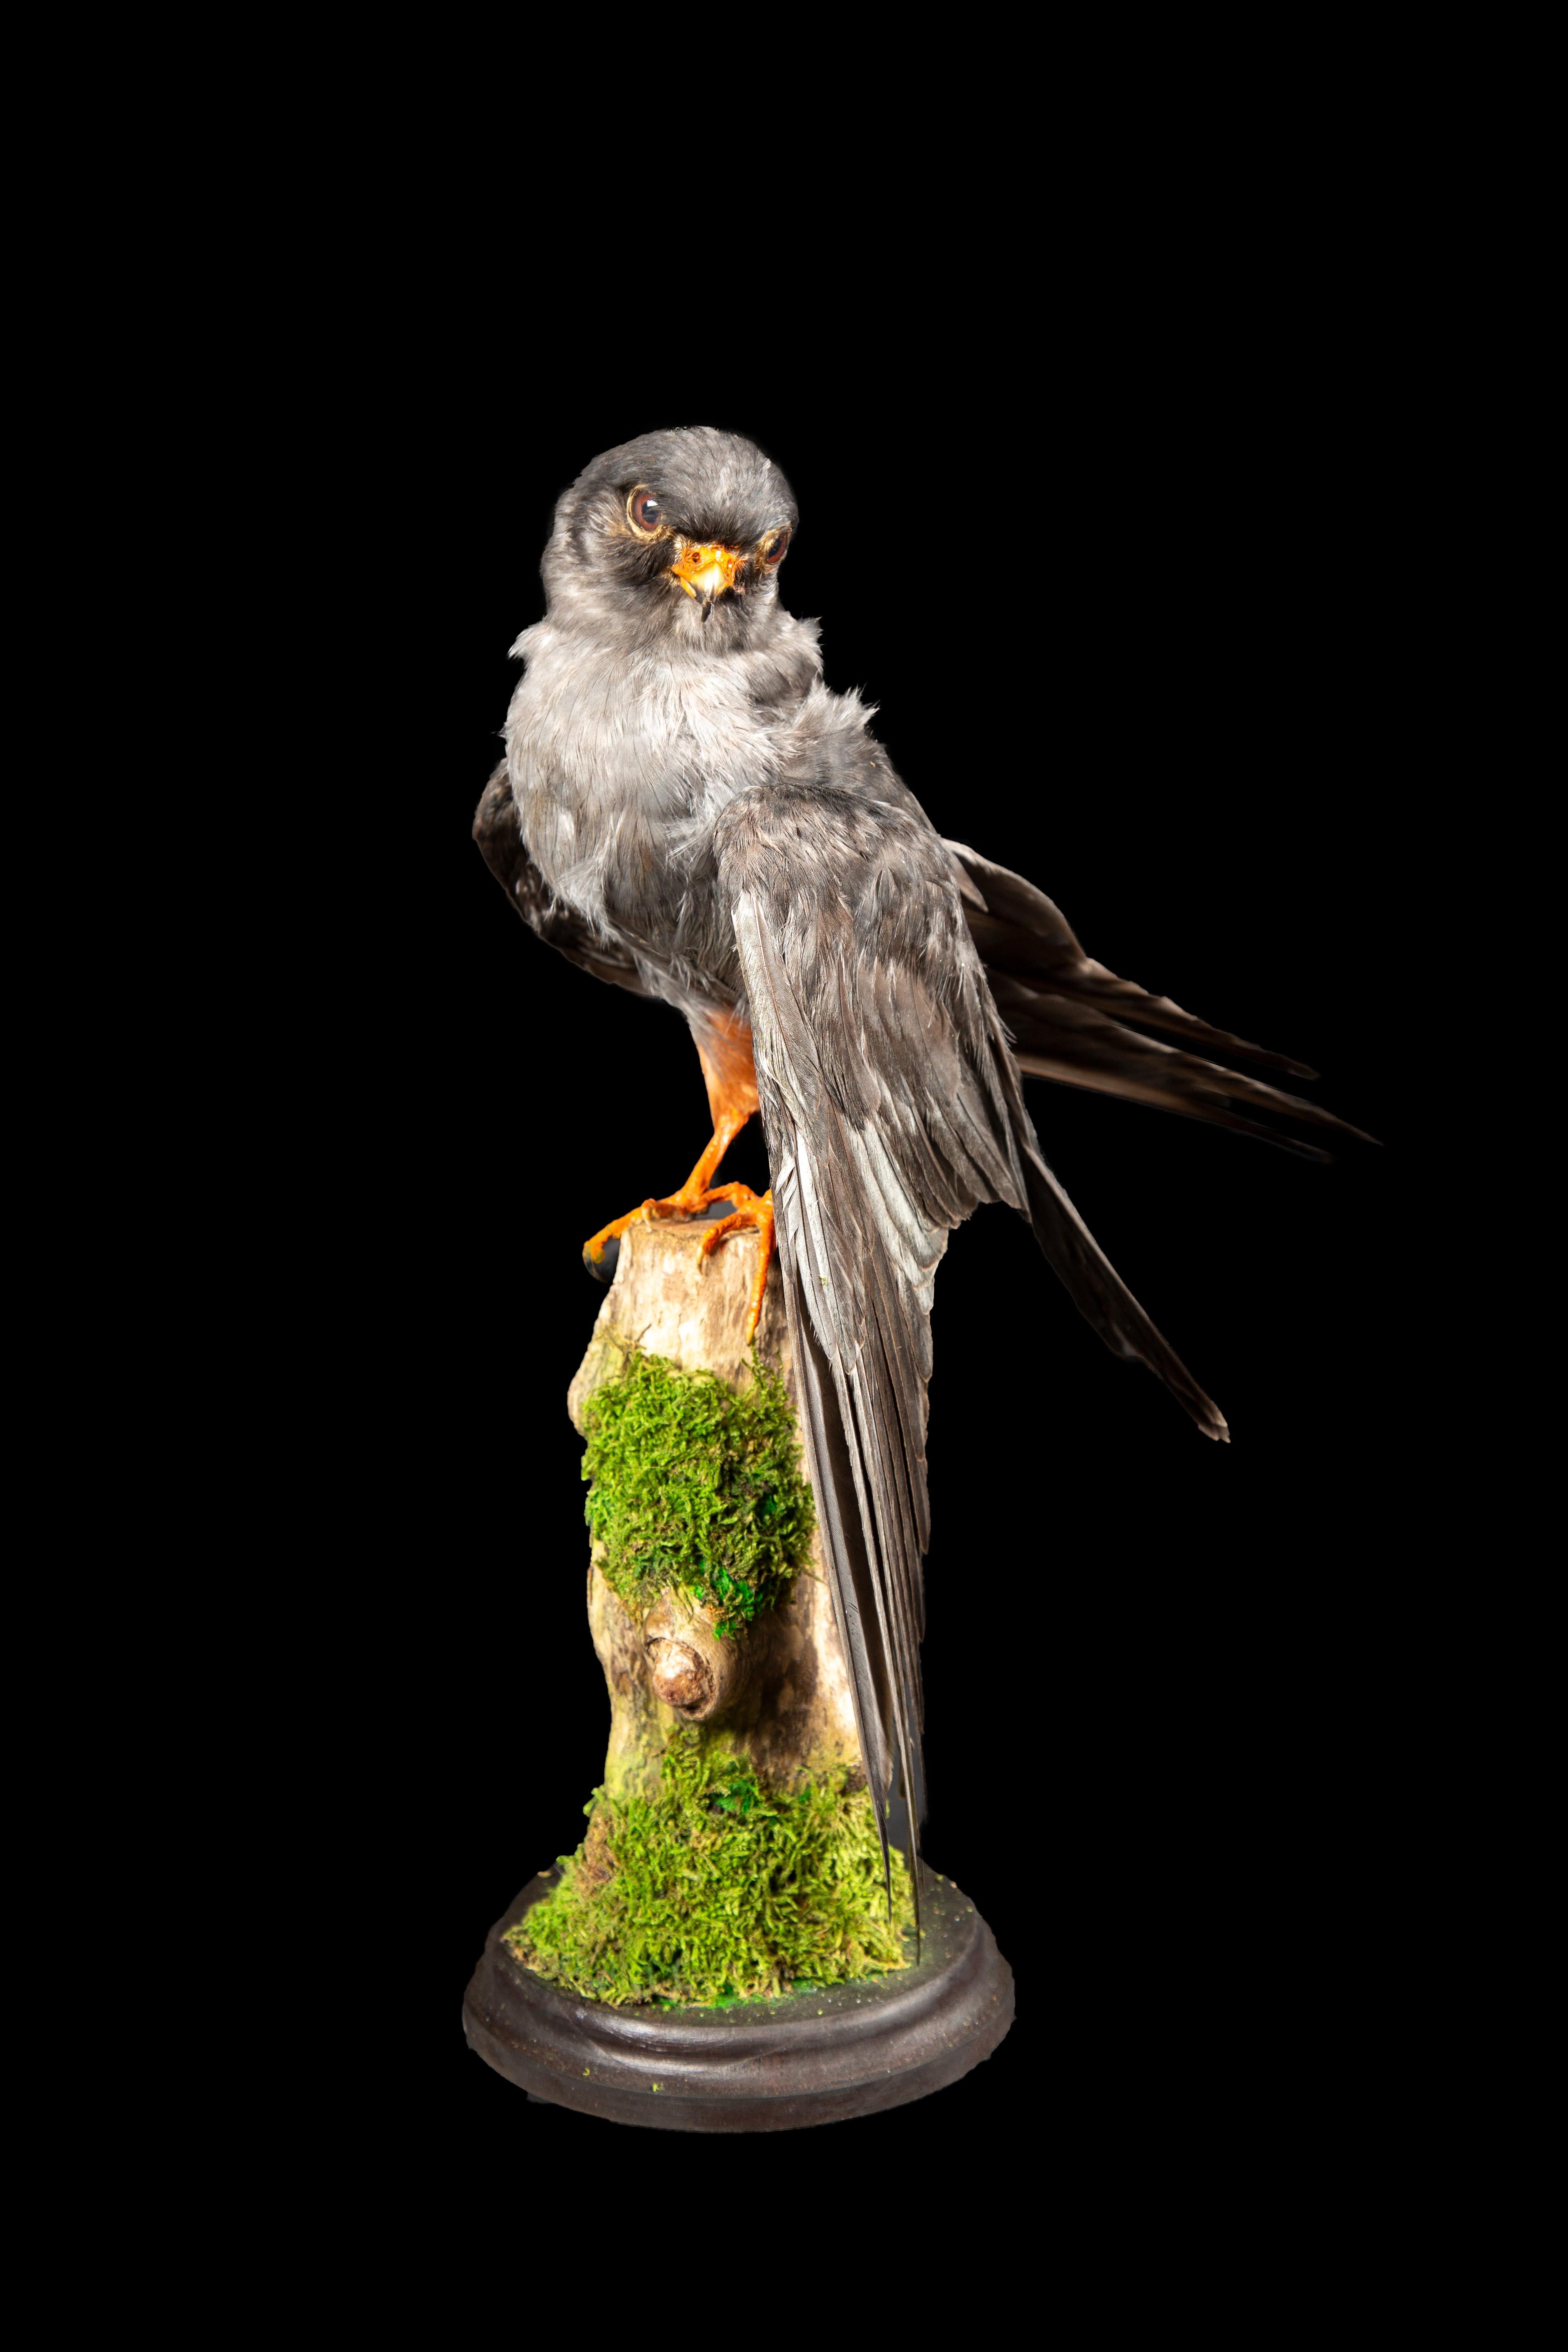 American Graceful Beauty Preserved: Taxidermy Specimen of the Lesser Kestrel on Branch For Sale